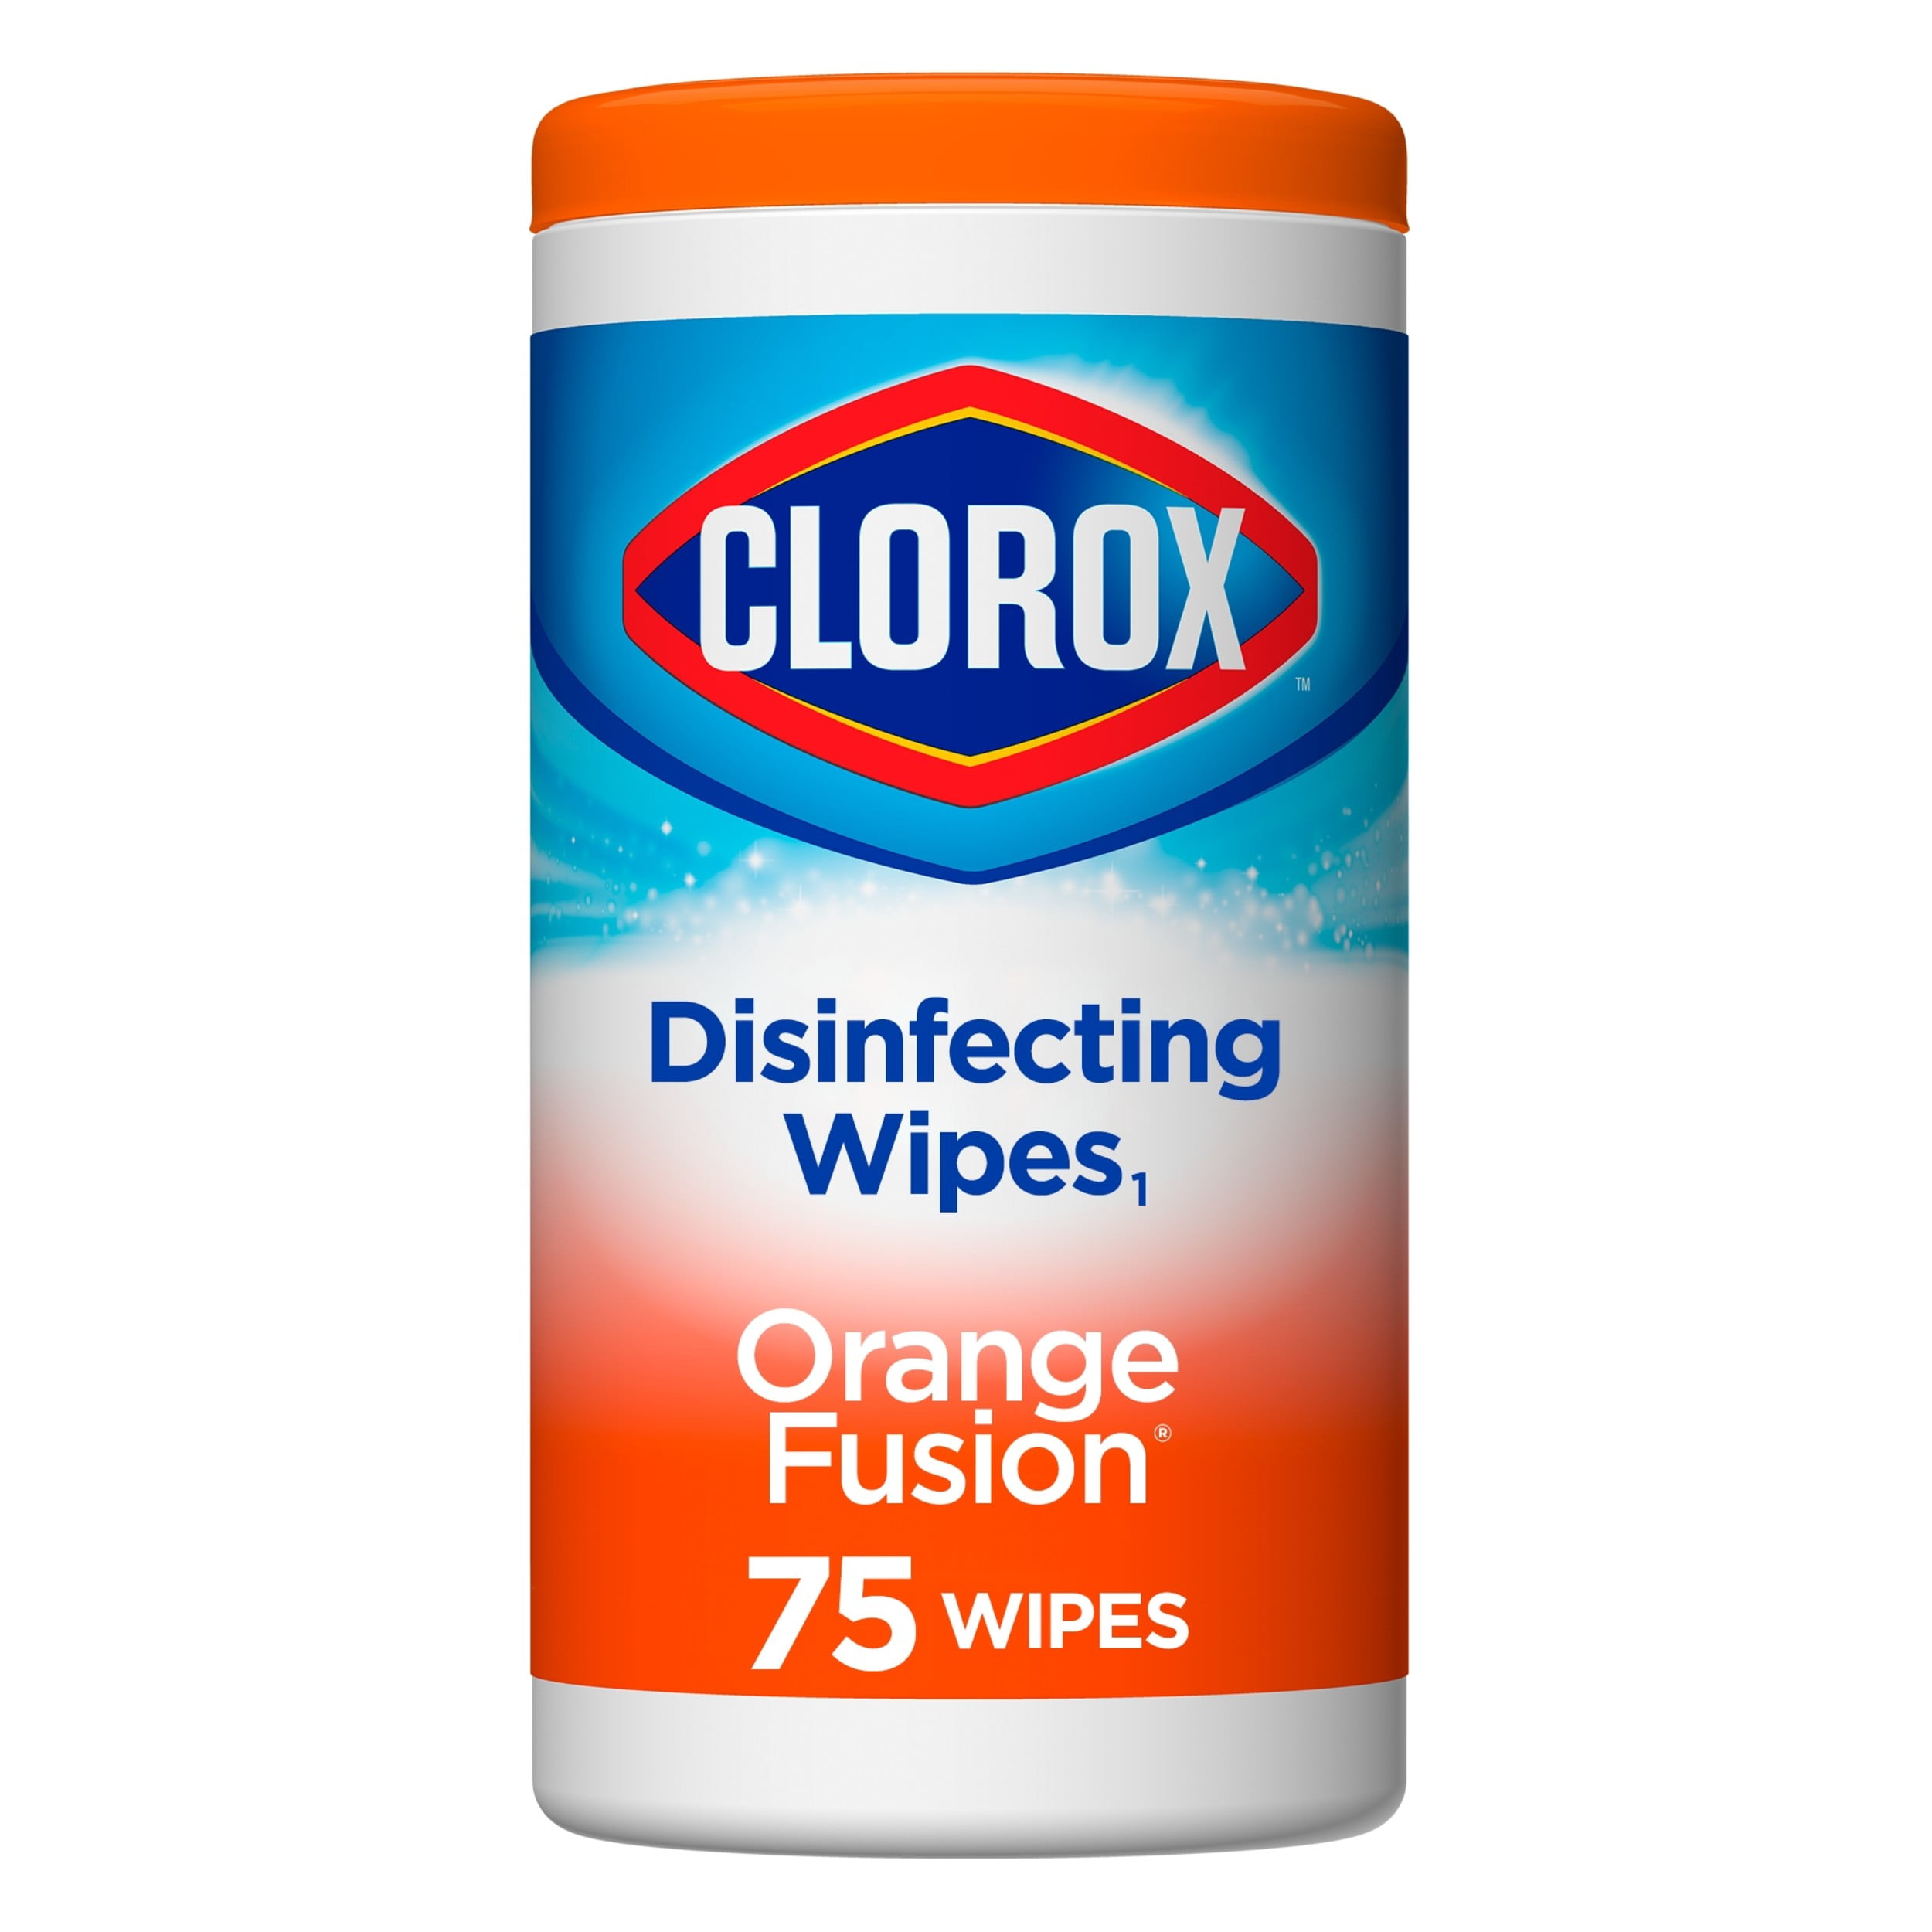 Pack of 12 Orange Fusion Packaging May Vary 35 Count Clorox Disinfecting Wipes Bleach Free Cleaning Wipes